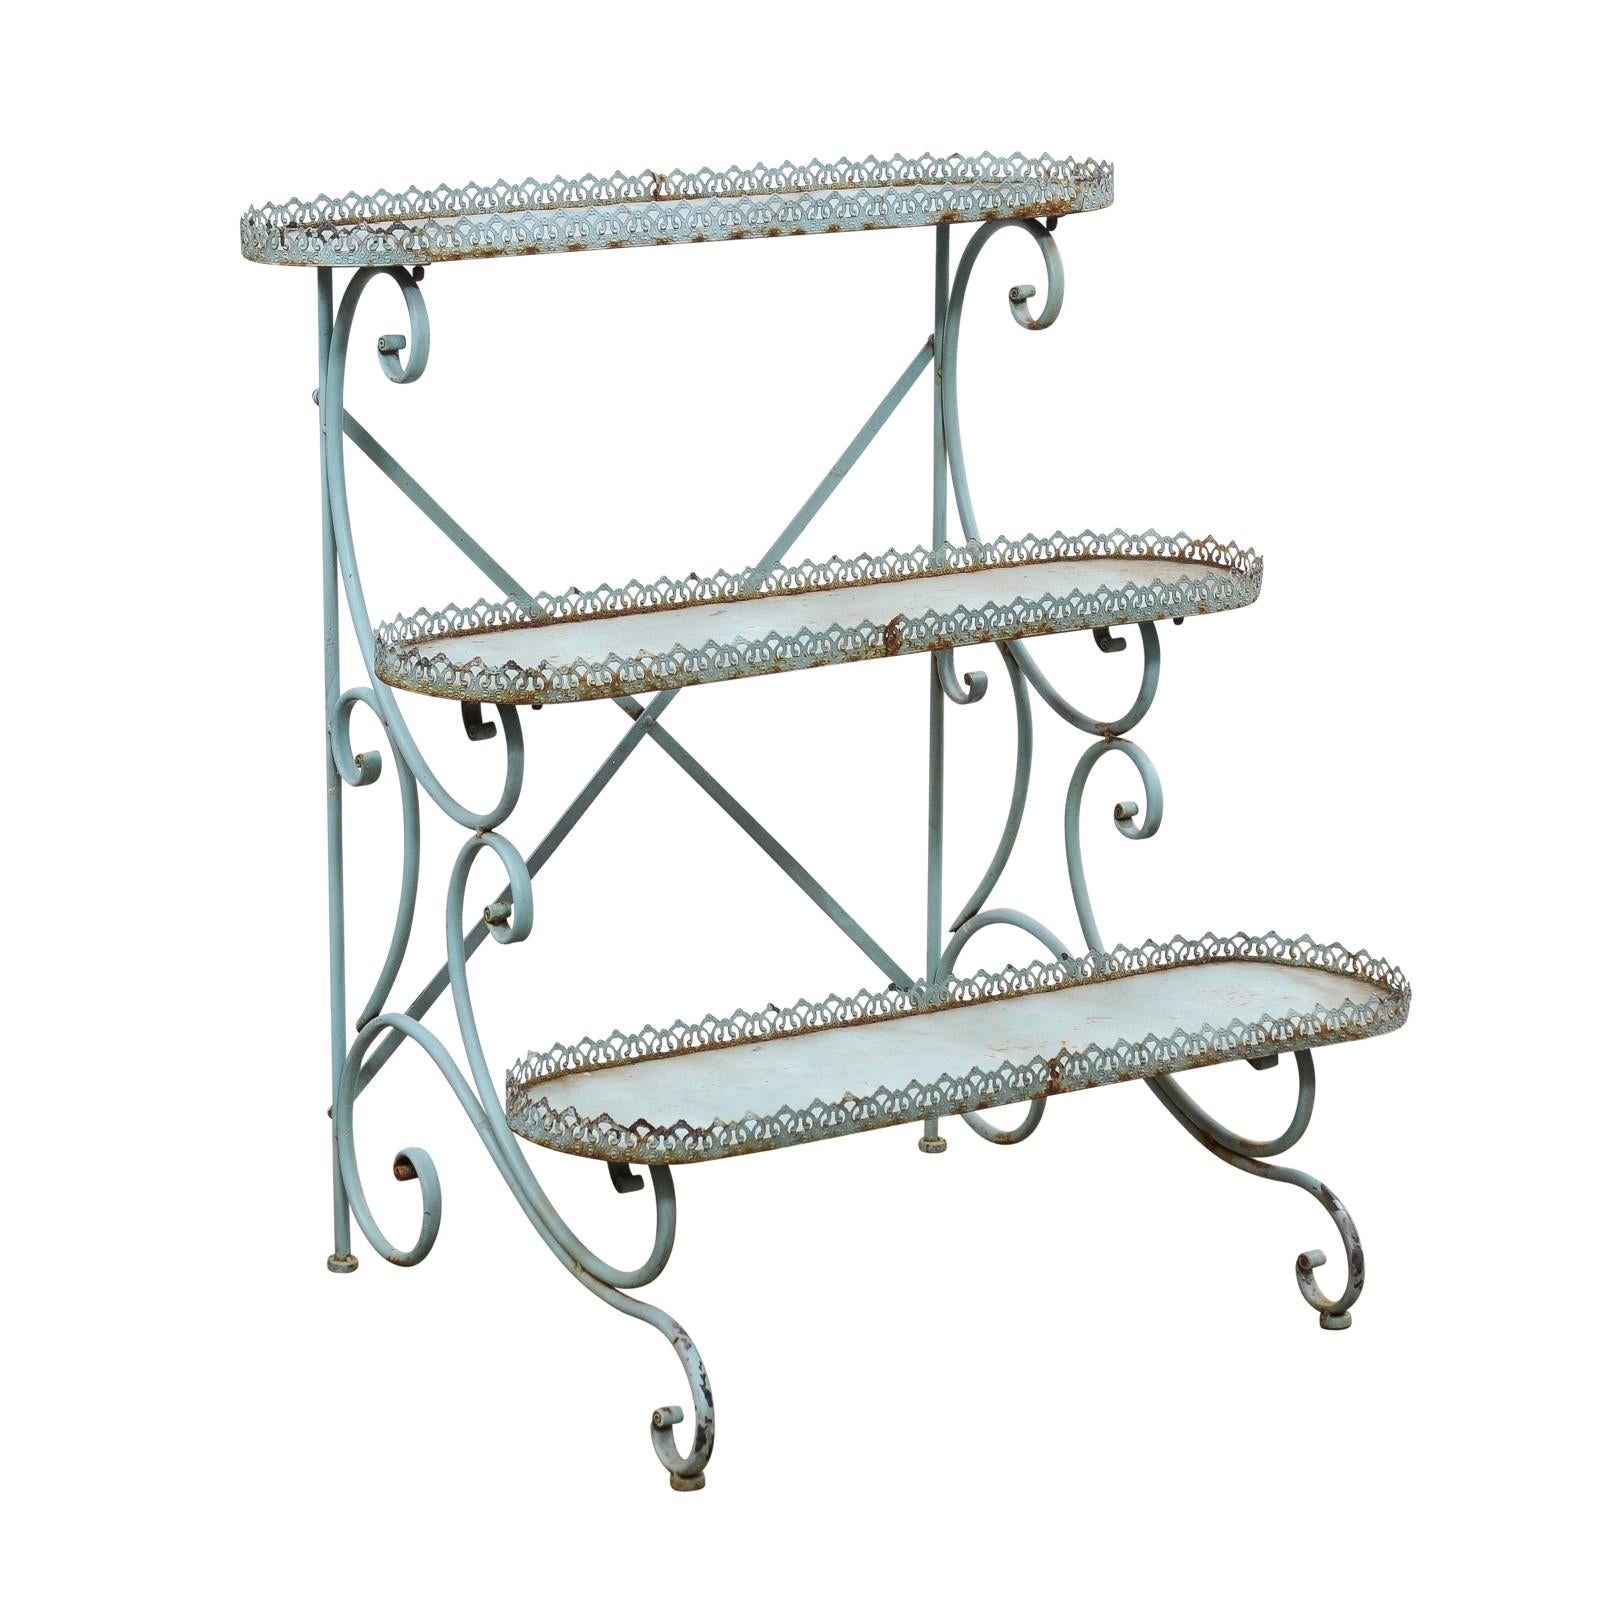 A French blue painted iron three-tiered plant stand from the 20th century with pierced gallery and scrolling legs. This French blue painted iron plant stand, hailing from the 20th century, is a delightful addition to any garden or home space.